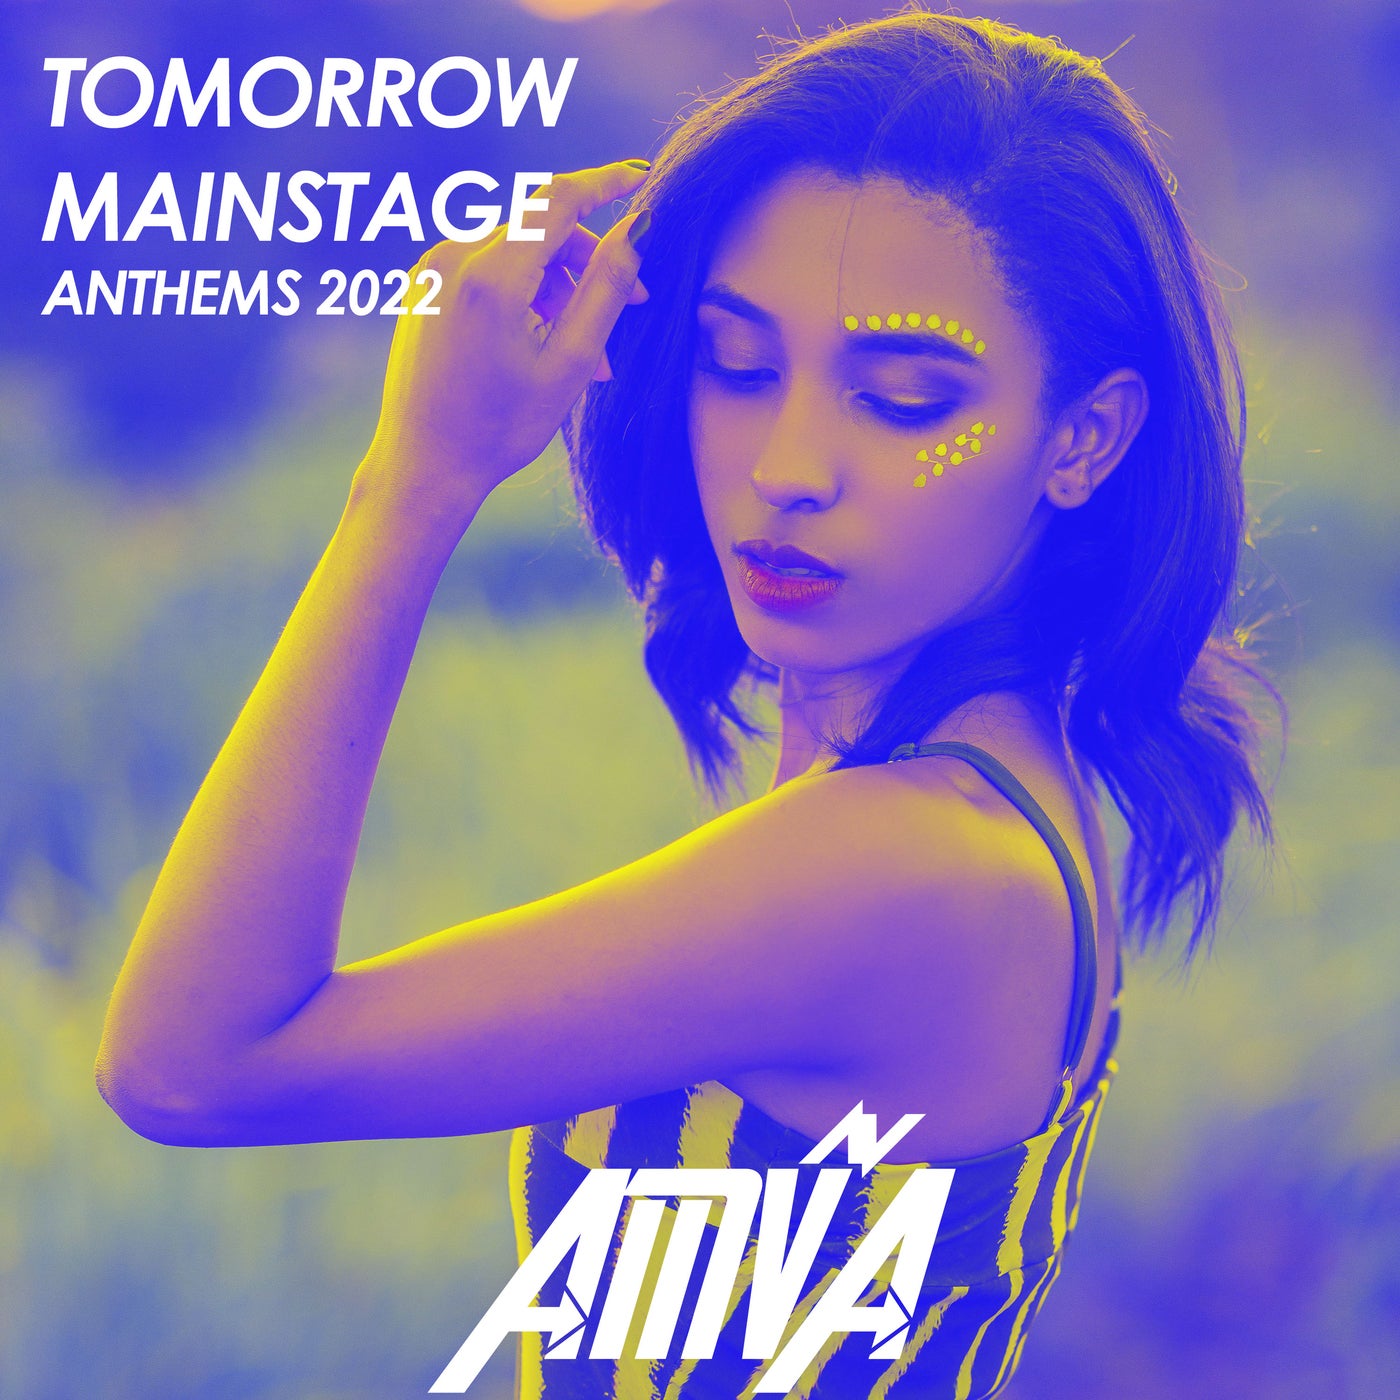 Tomorrow Mainstage Anthems 2022